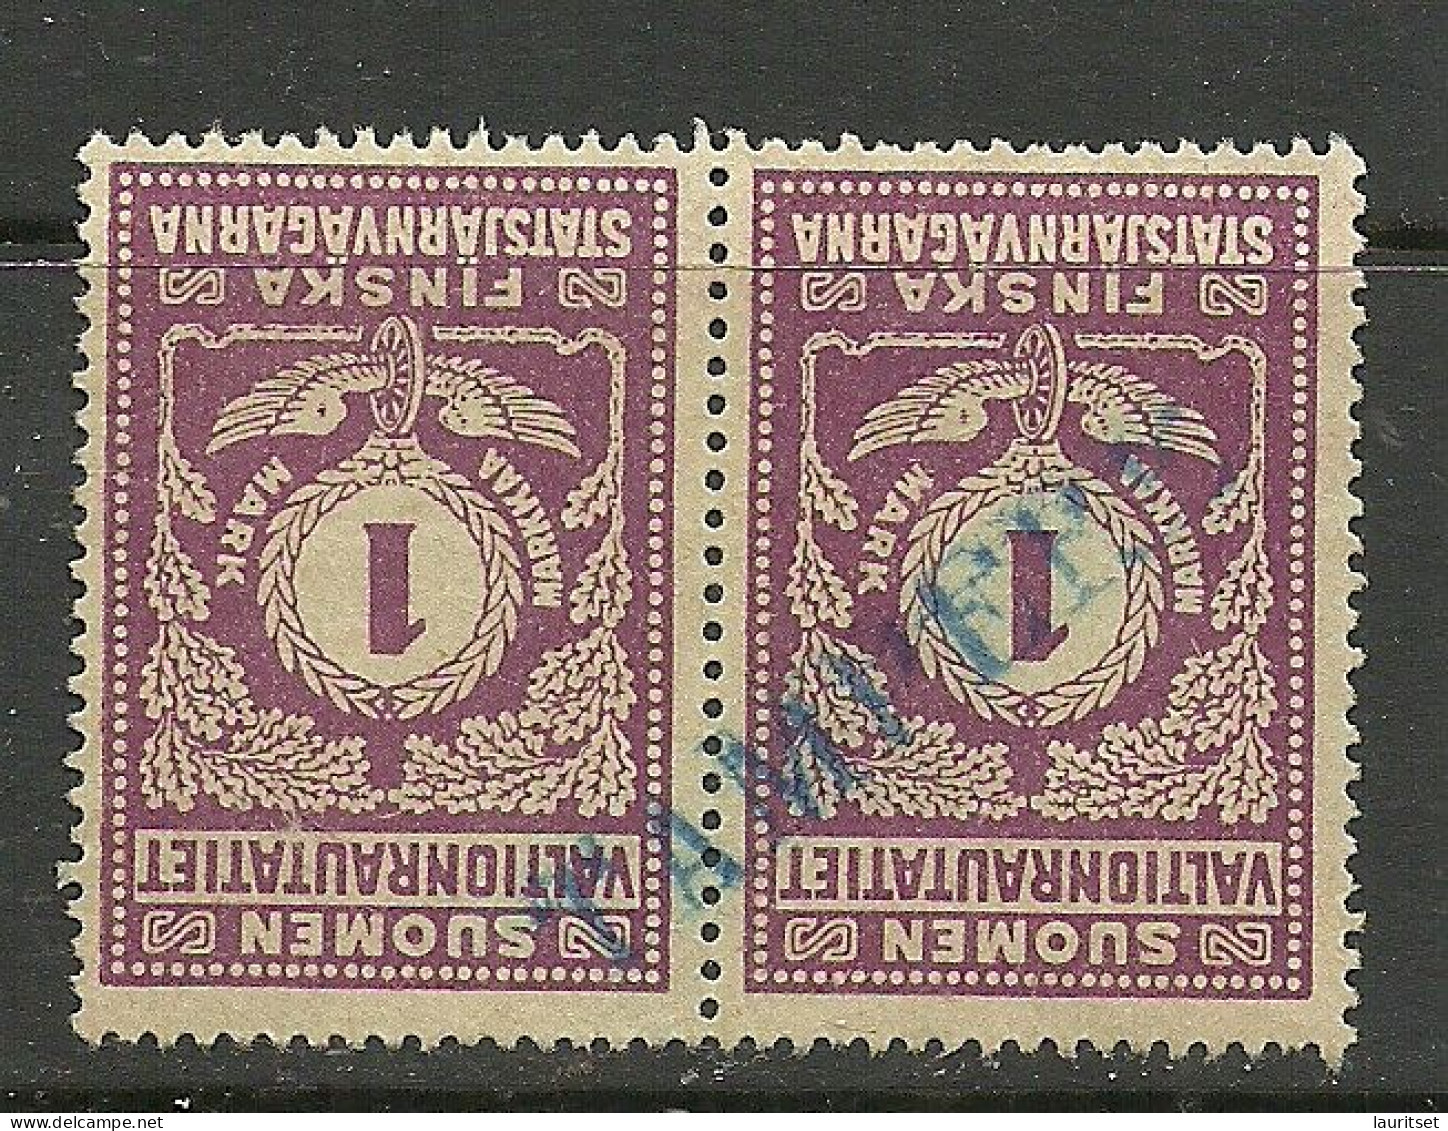 FINLAND FINNLAND 1920/1921 Railway Stamps State Railway 1 MK As Pair Tampere - Pacchi Postali